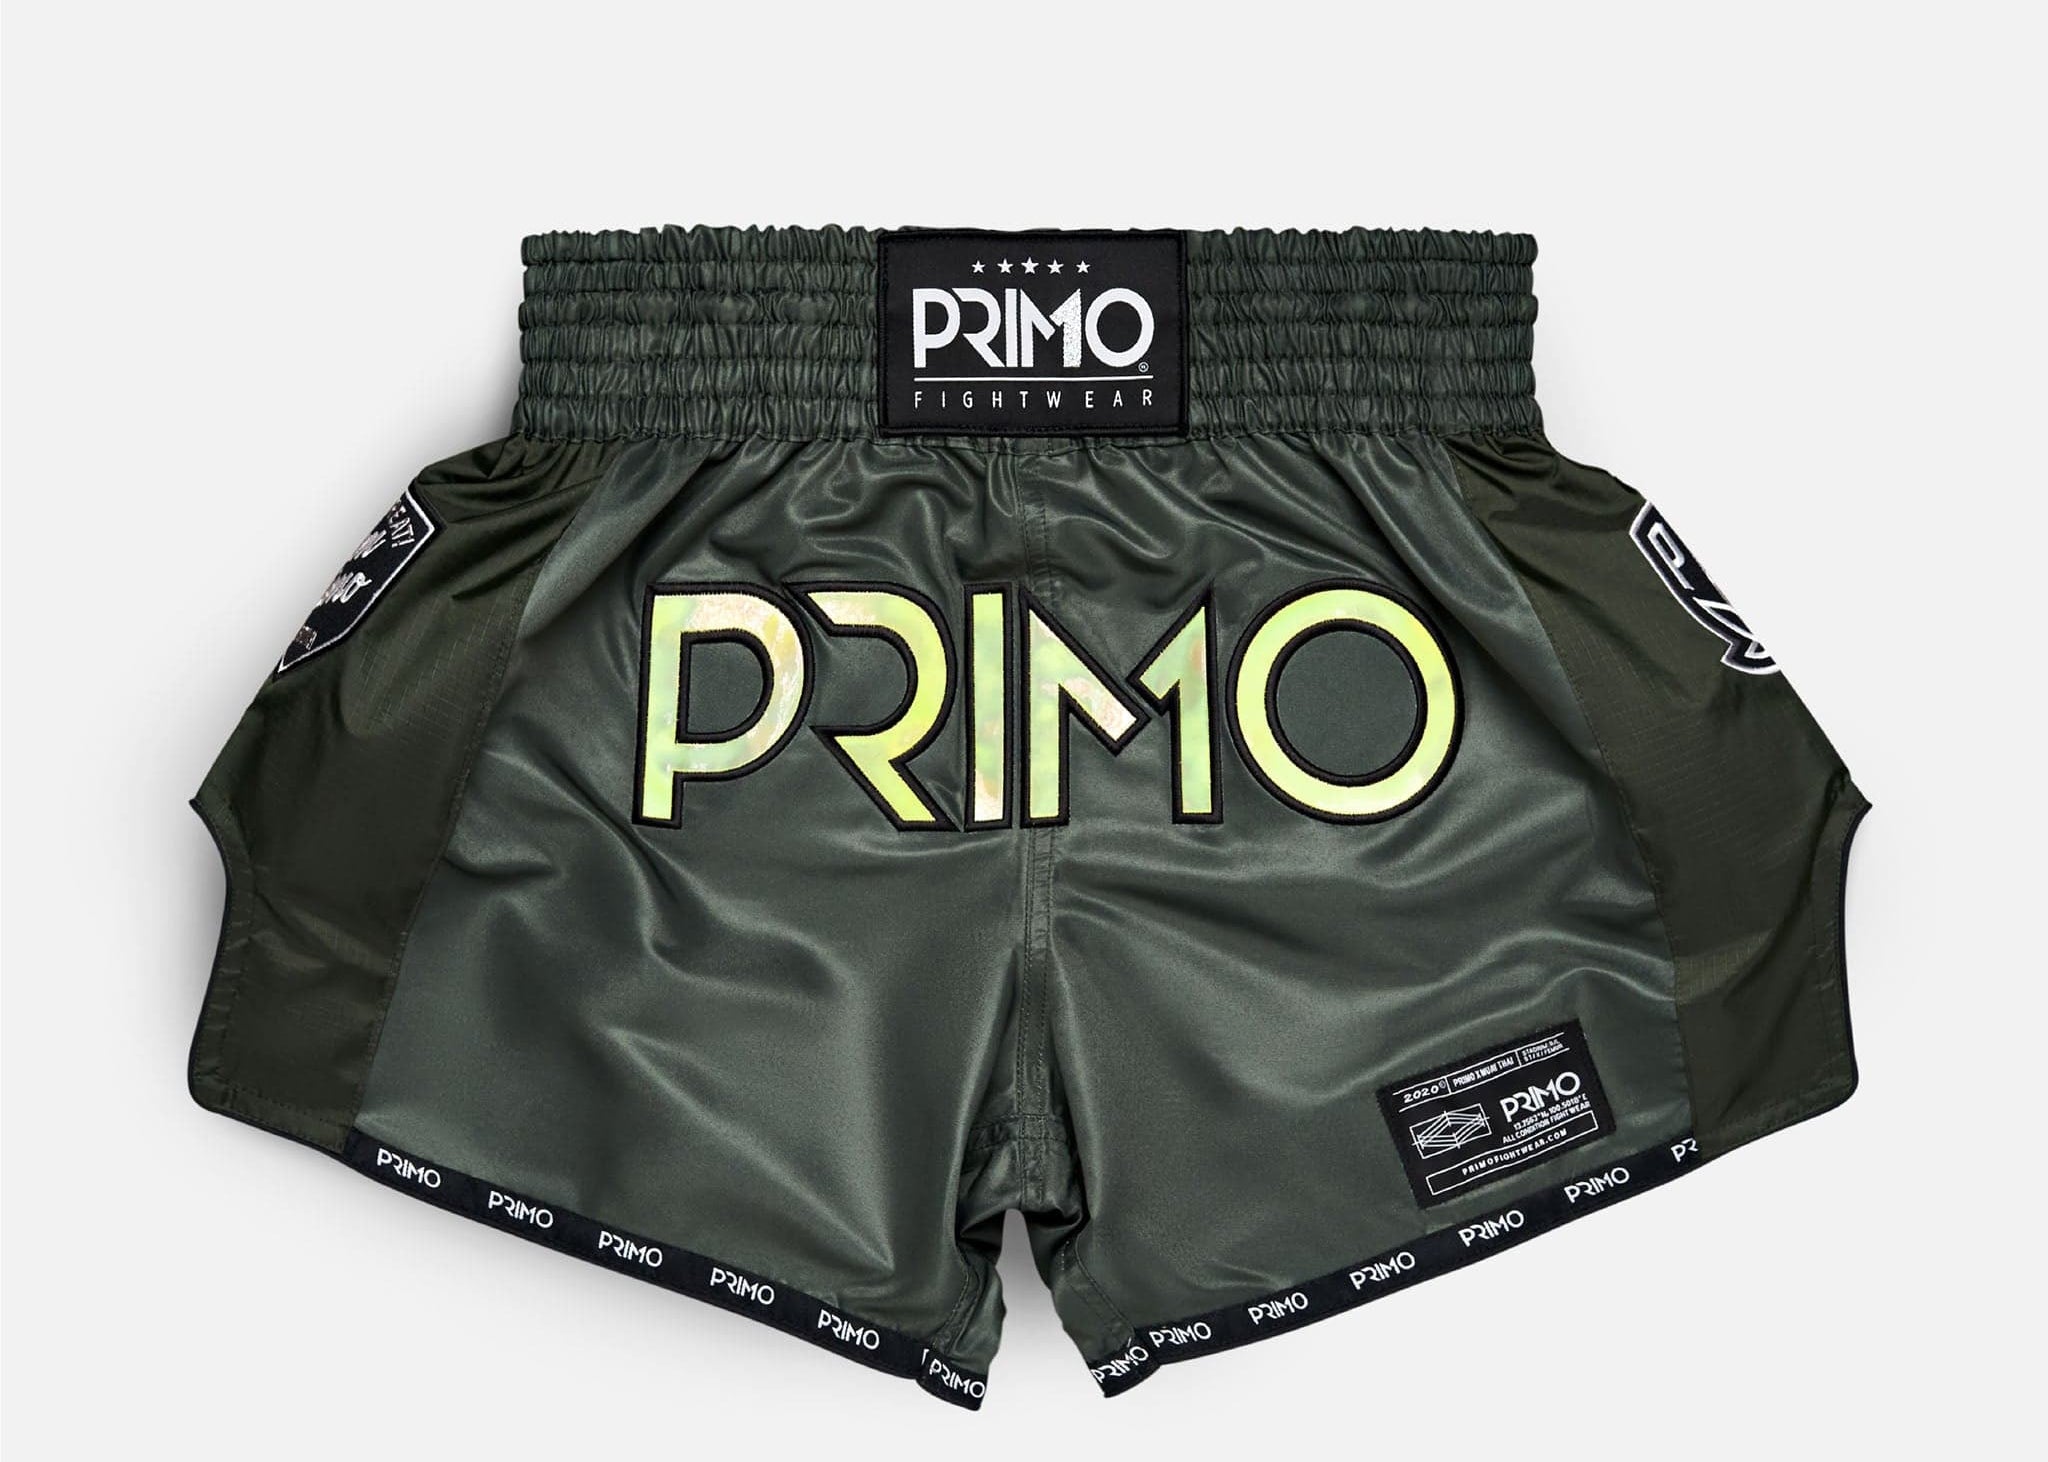 Primo Fight Wear Official Muay Thai Shorts - Hologram Series - Valor Green